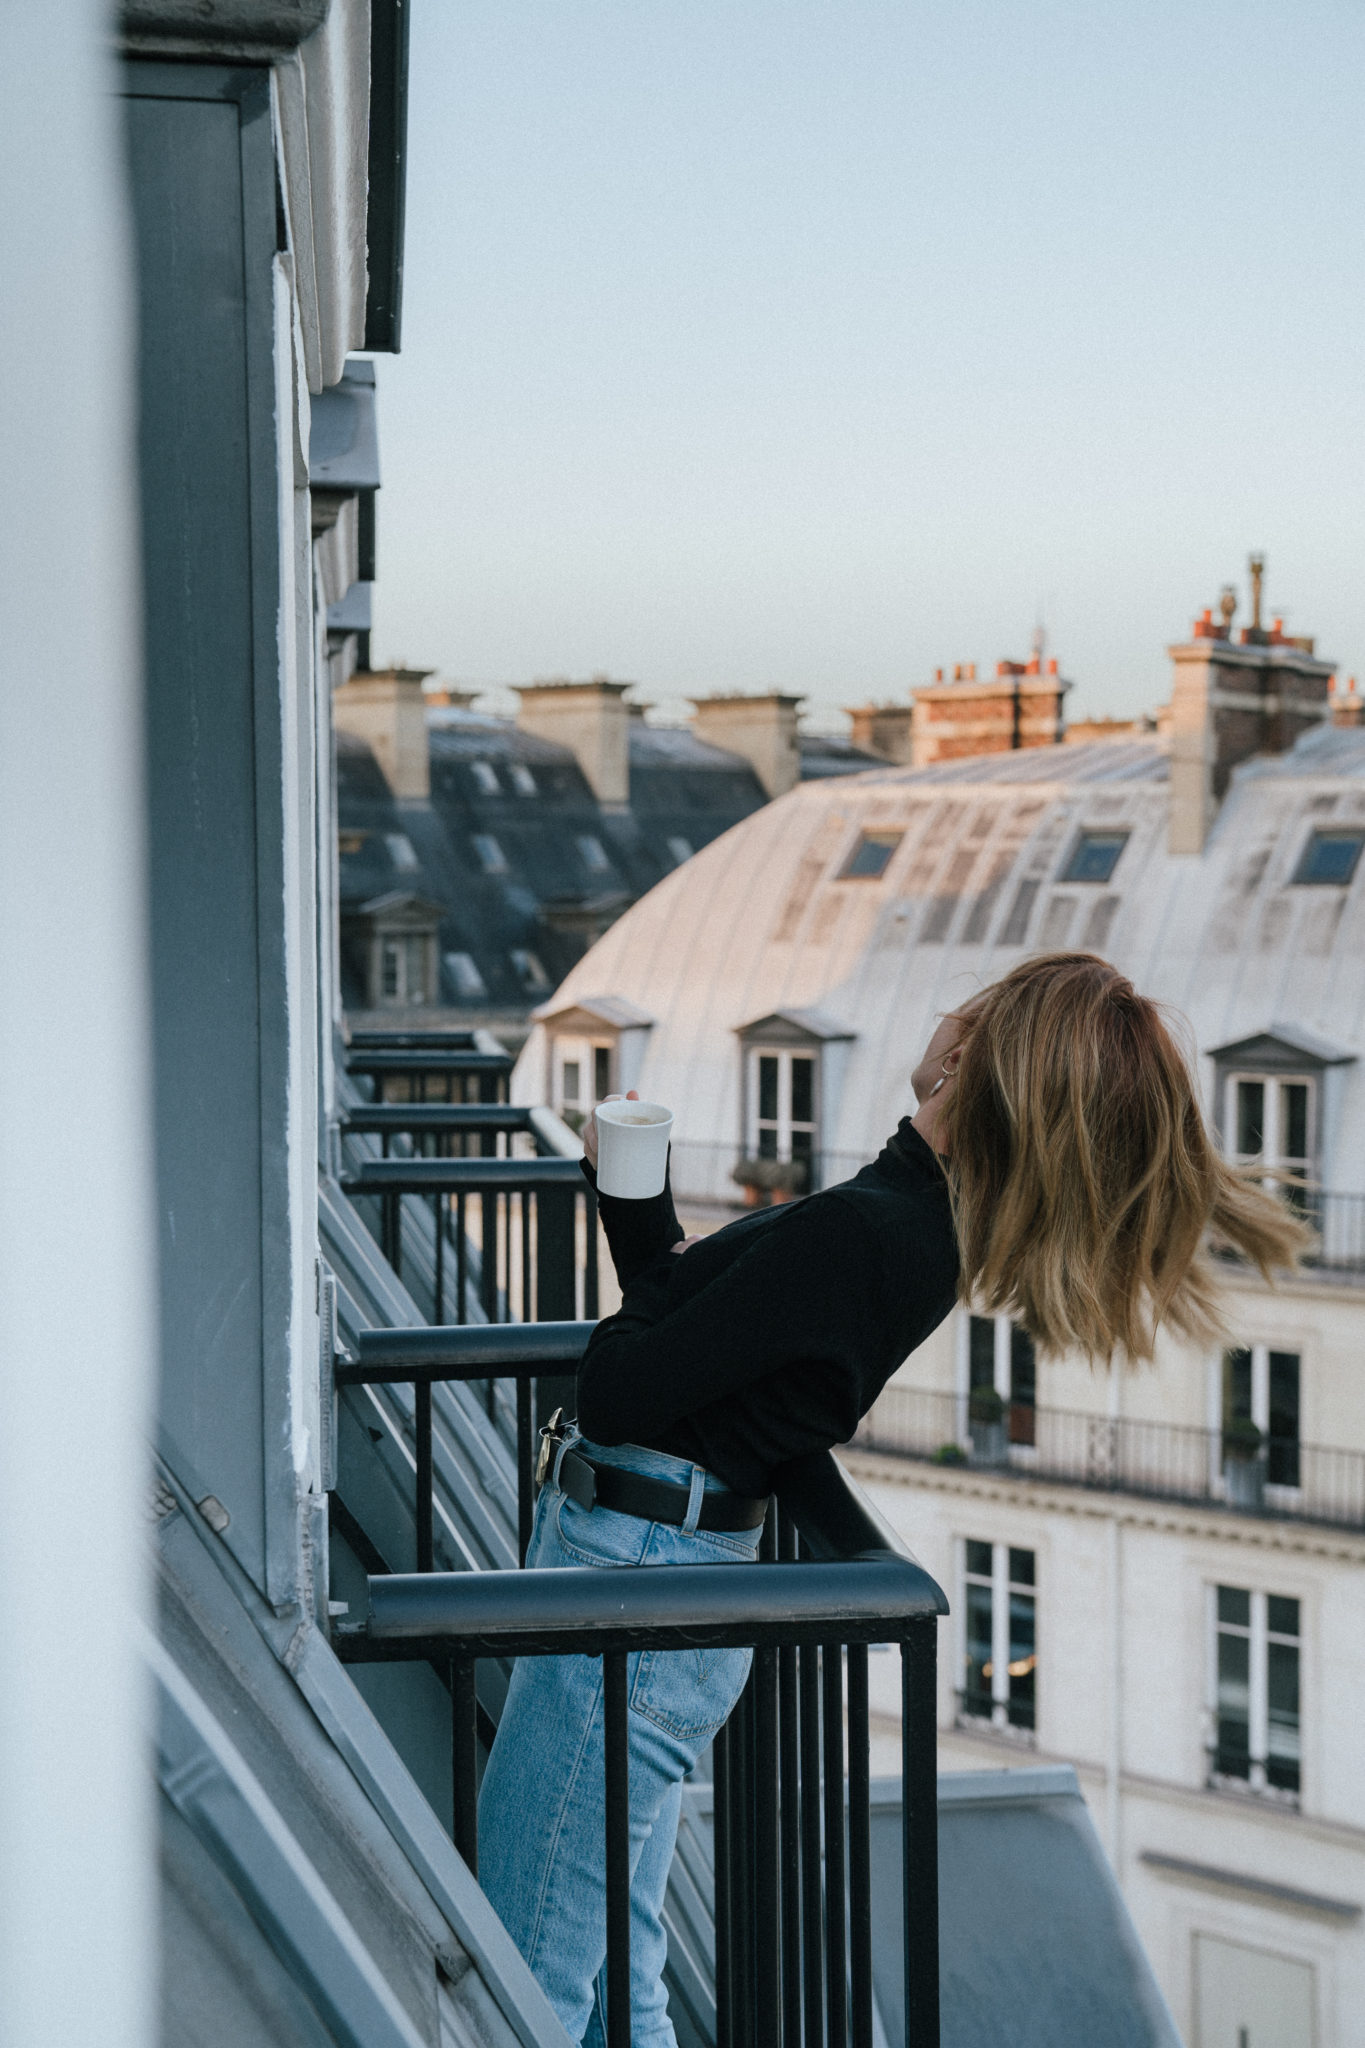 Forget AirBnB: These are the most stylish apartments to rent in Paris